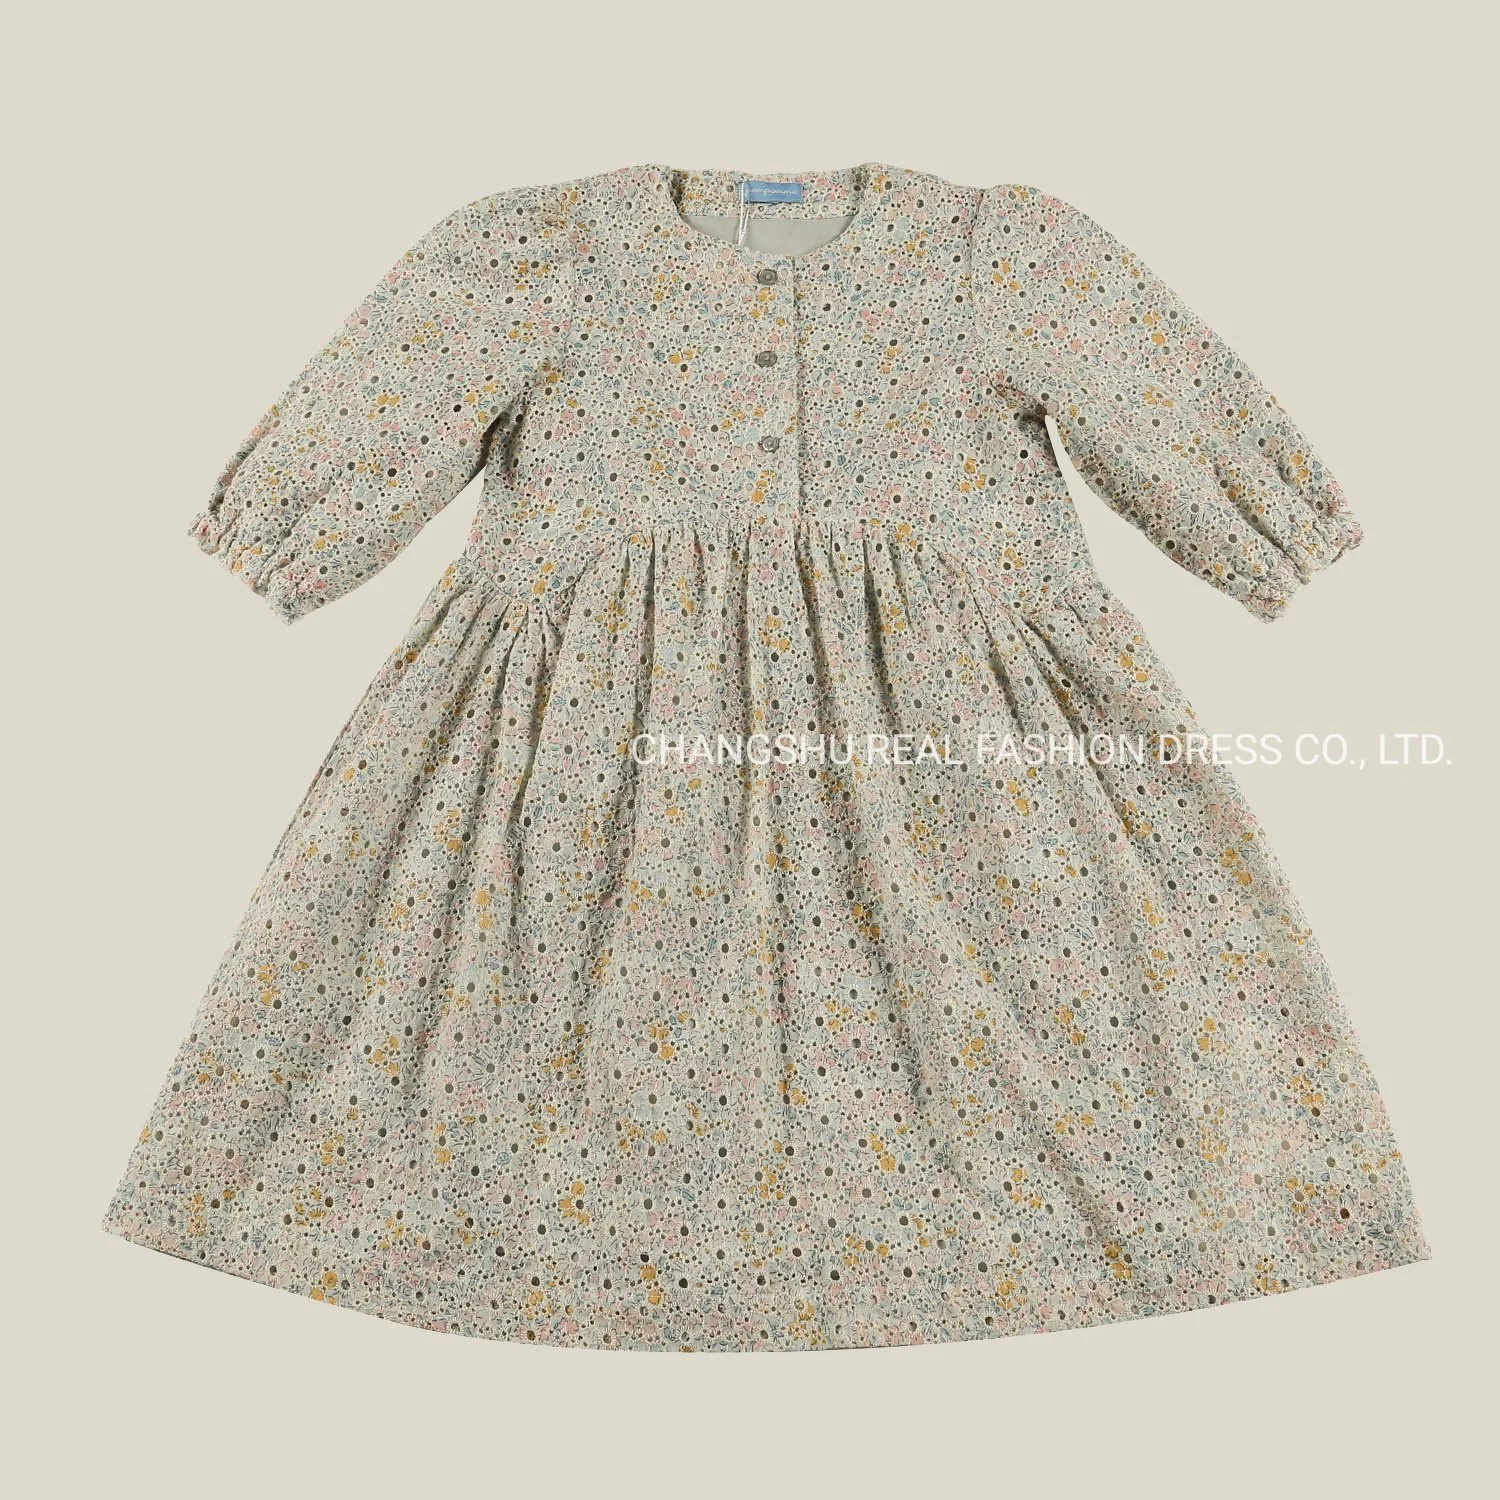 Children Clothing Girl Kids Fashion Woven Dress Wear with Embroidery Fabric